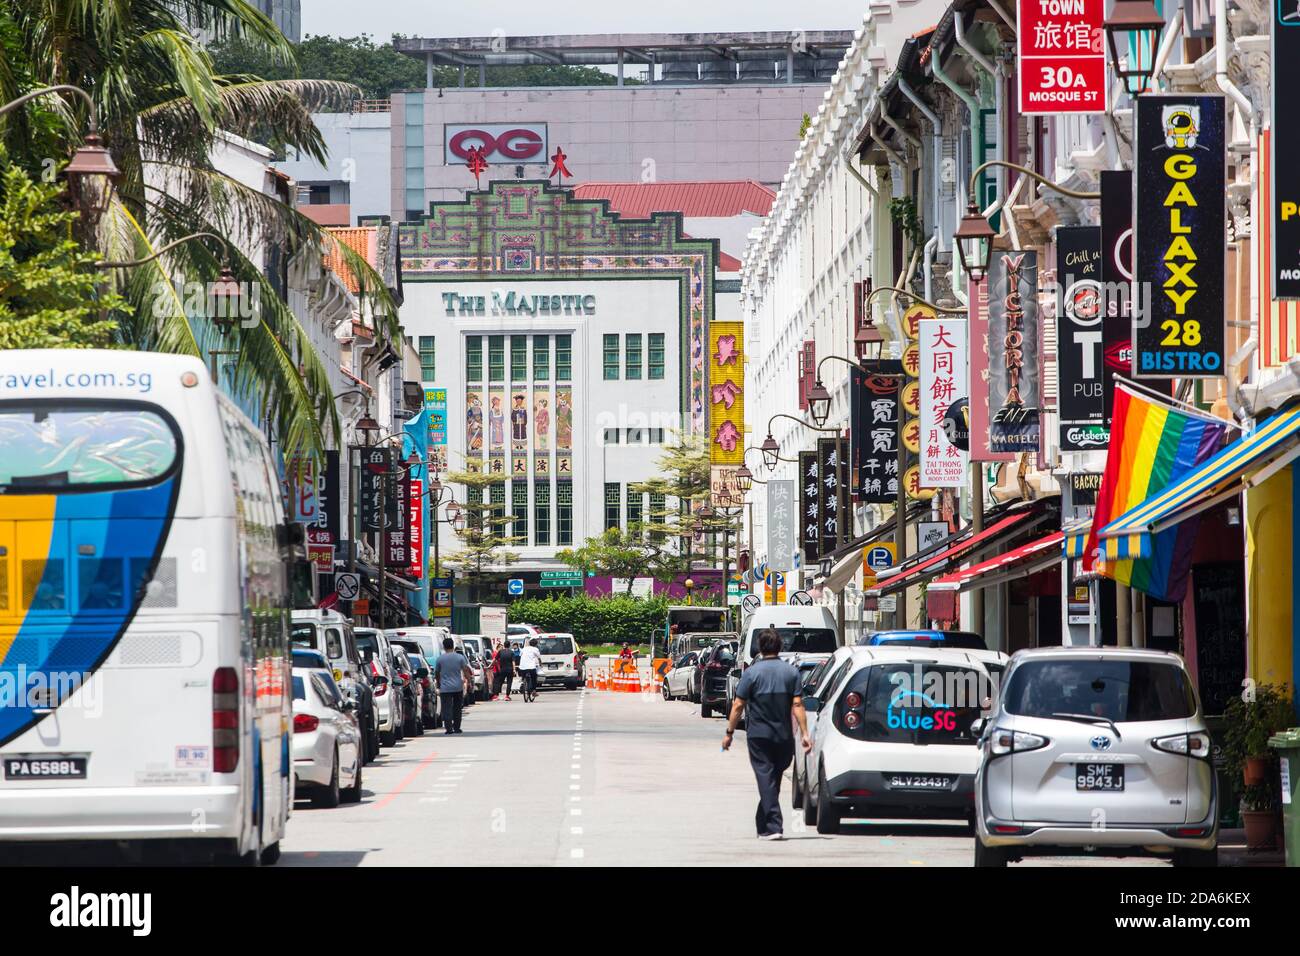 Chinatown scene of backpacker hostel, pubs, restaurants and variety of shops to explore. Singapore. 2020. Stock Photo